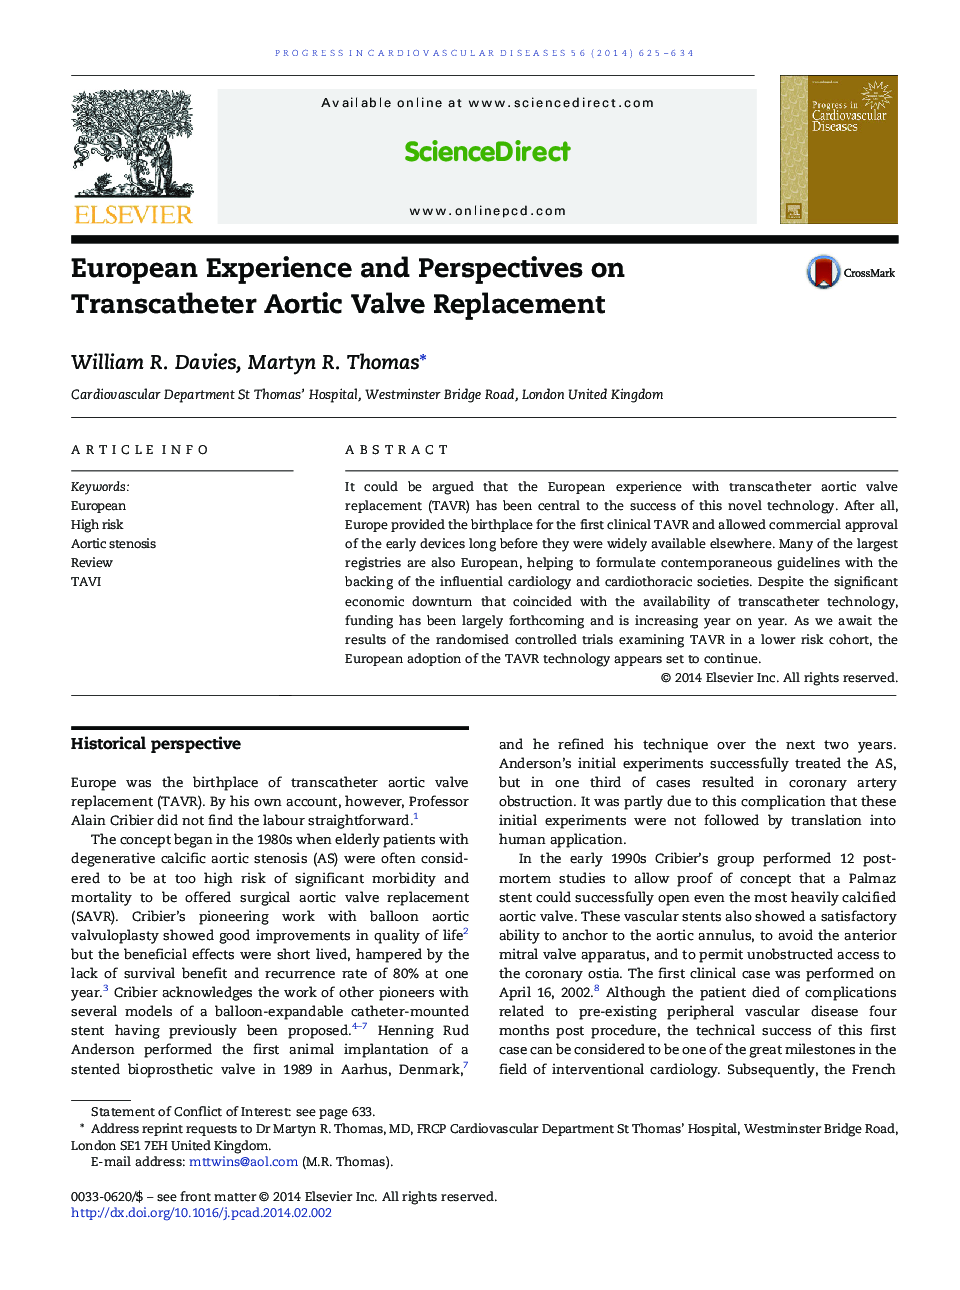 European Experience and Perspectives on Transcatheter Aortic Valve Replacement 